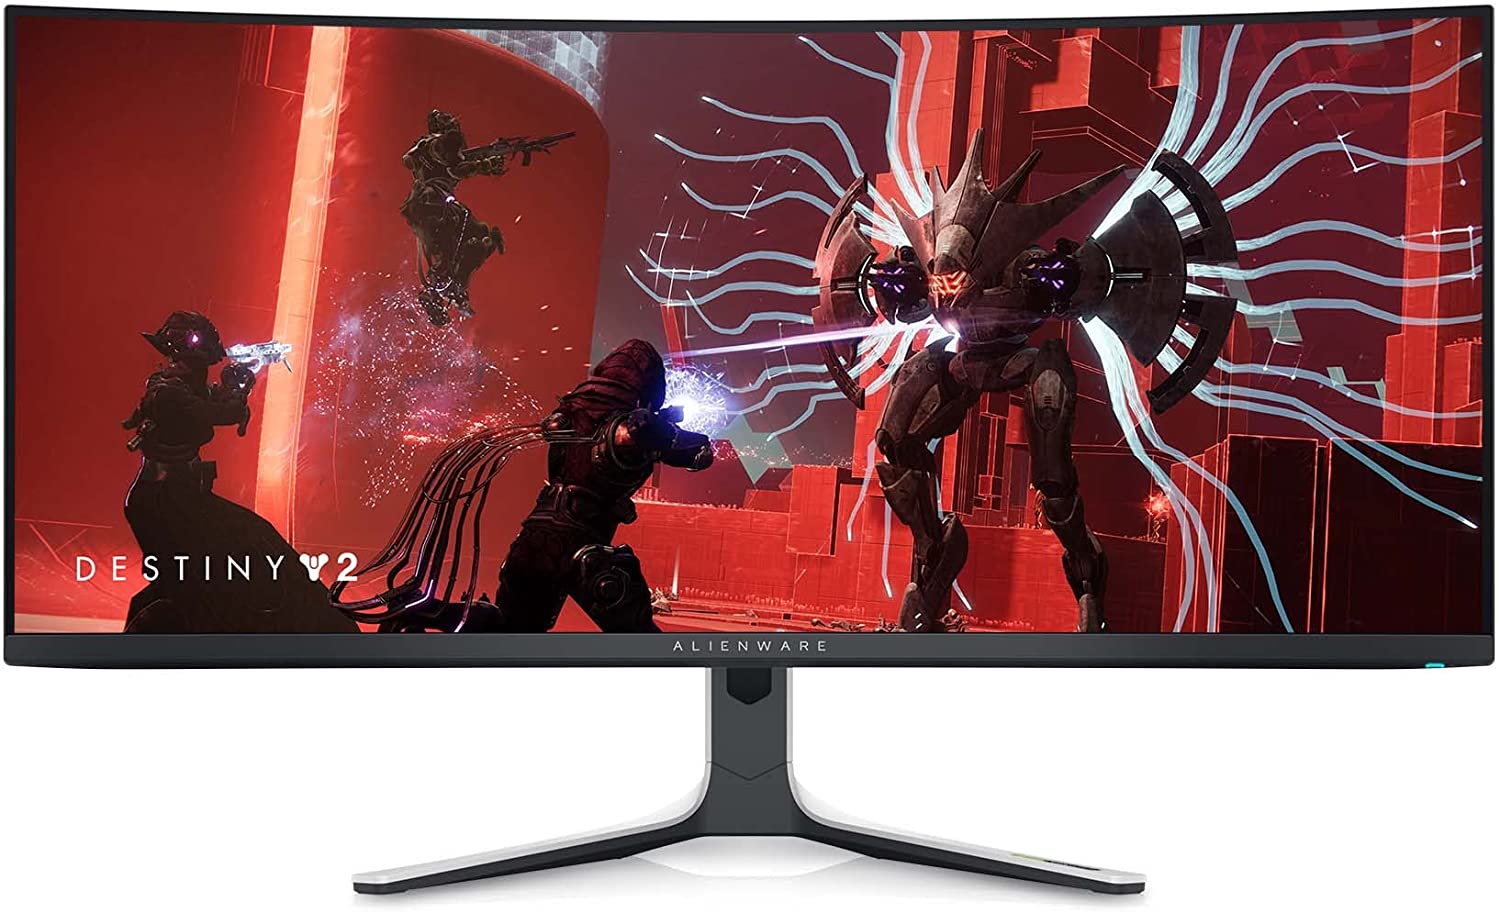 Alienware 34 Inch Curved PC Gaming Monitor, 3440 x 1440p Resolution, Quantum Dot OLED 175Hz, 1800R Curvature, True 1ms GTG, 1,000,000-1 Contrast Ratio